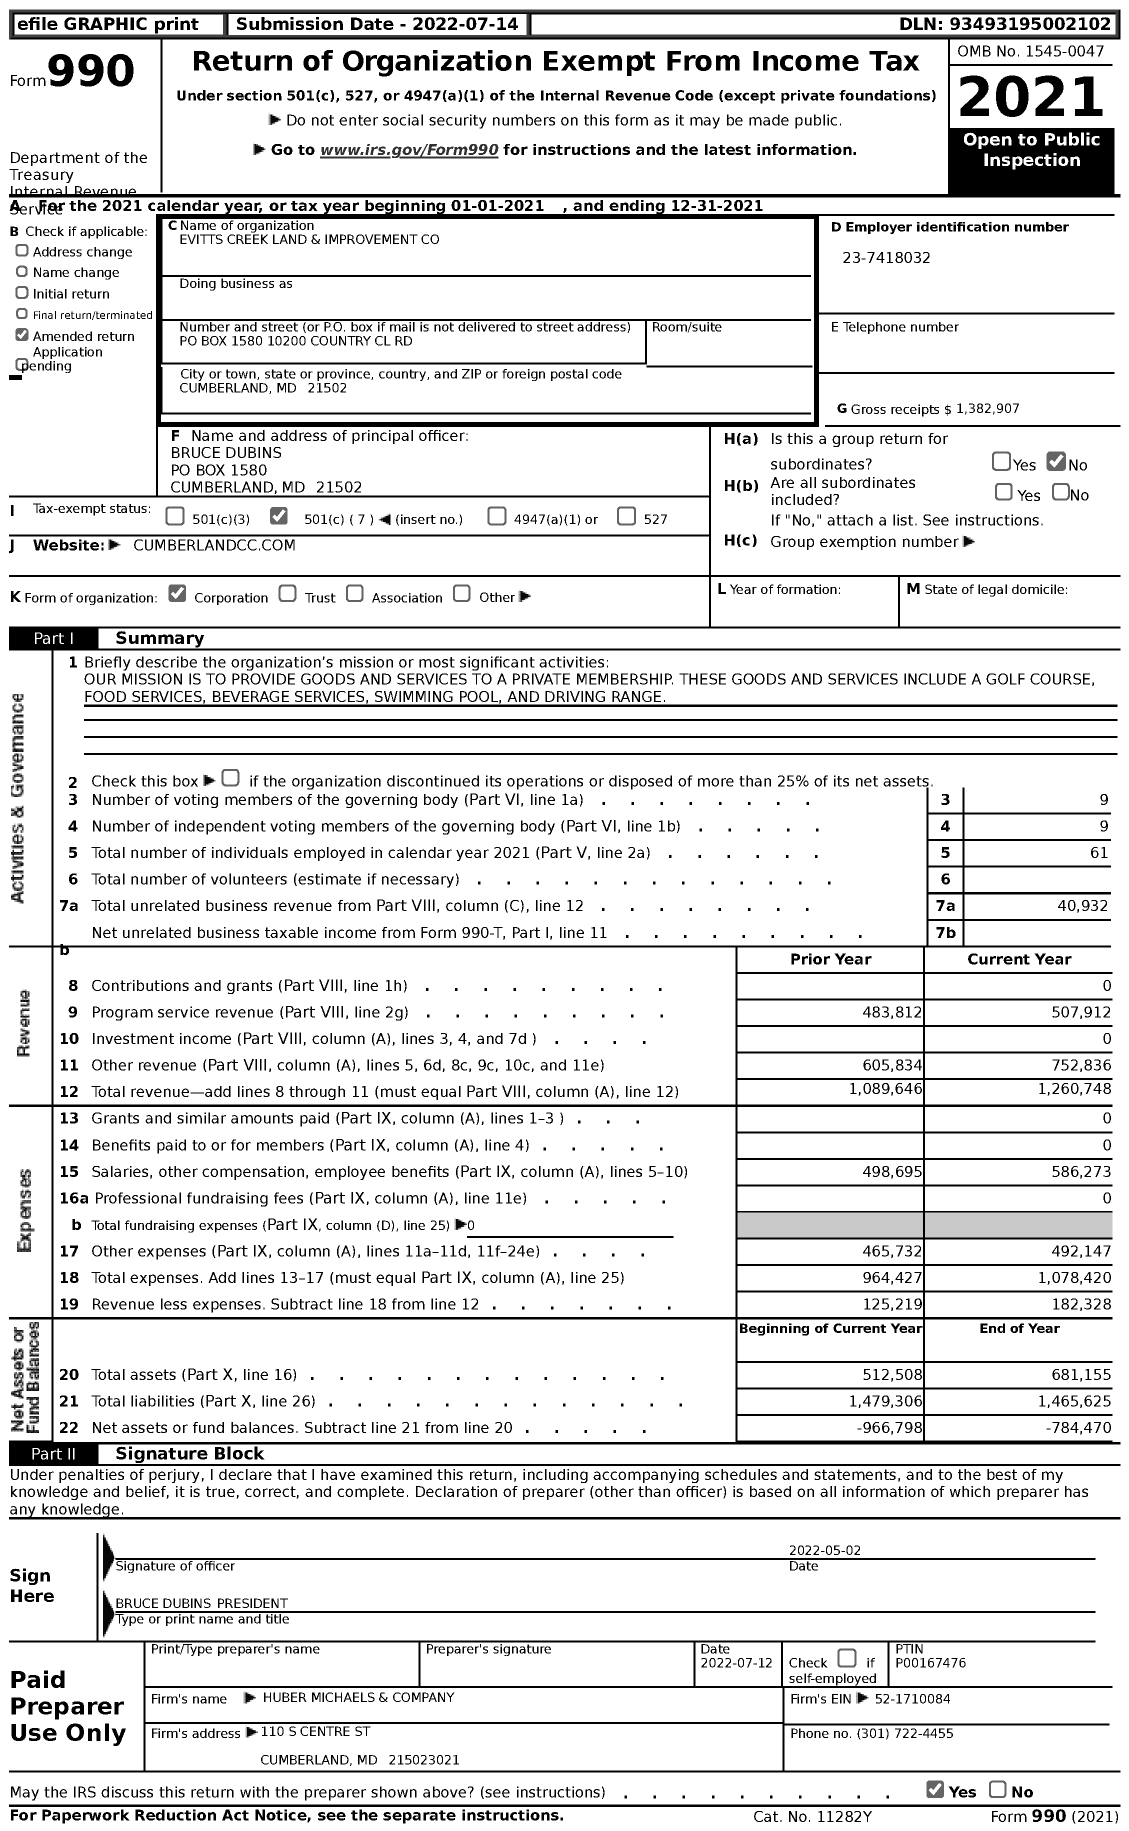 Image of first page of 2021 Form 990 for Evitts Creek Land and Improvement